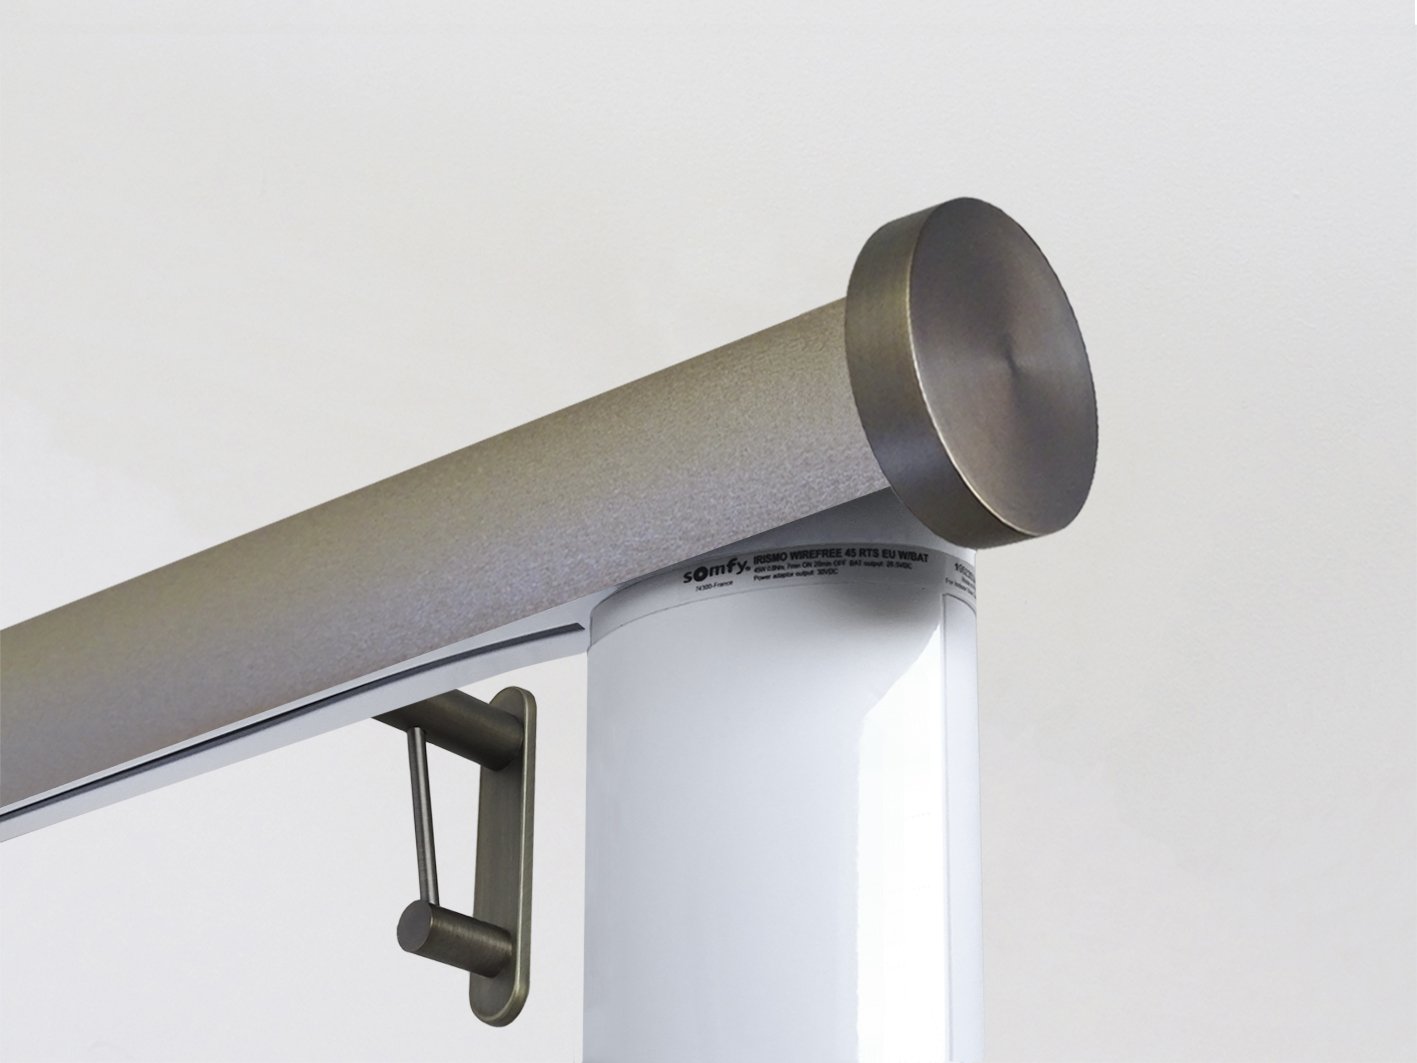 Motorised electric curtain pole in warm gunmetal driftwood, wireless & battery powered using the Somfy Glydea track | Walcot House UK curtain pole specialists